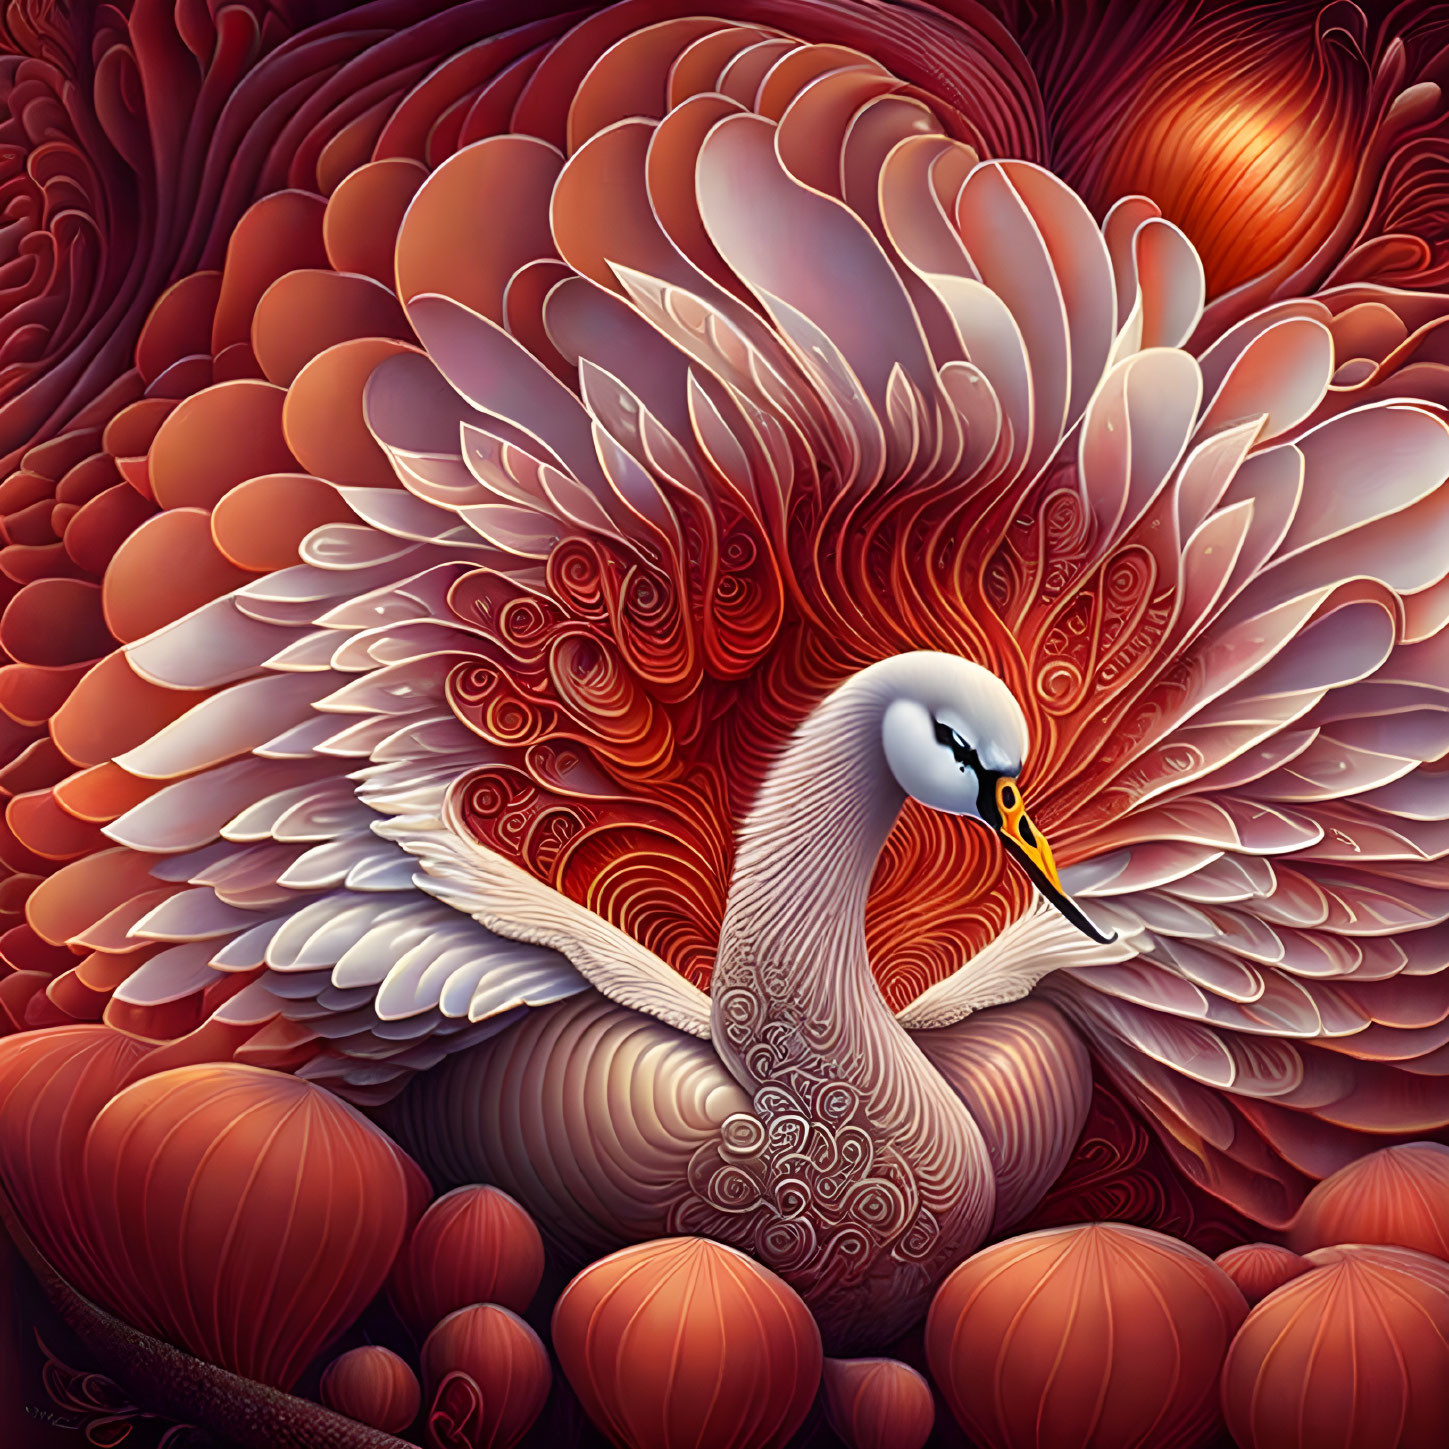 Stylized swan with intricate feather patterns on ornate floral backdrop